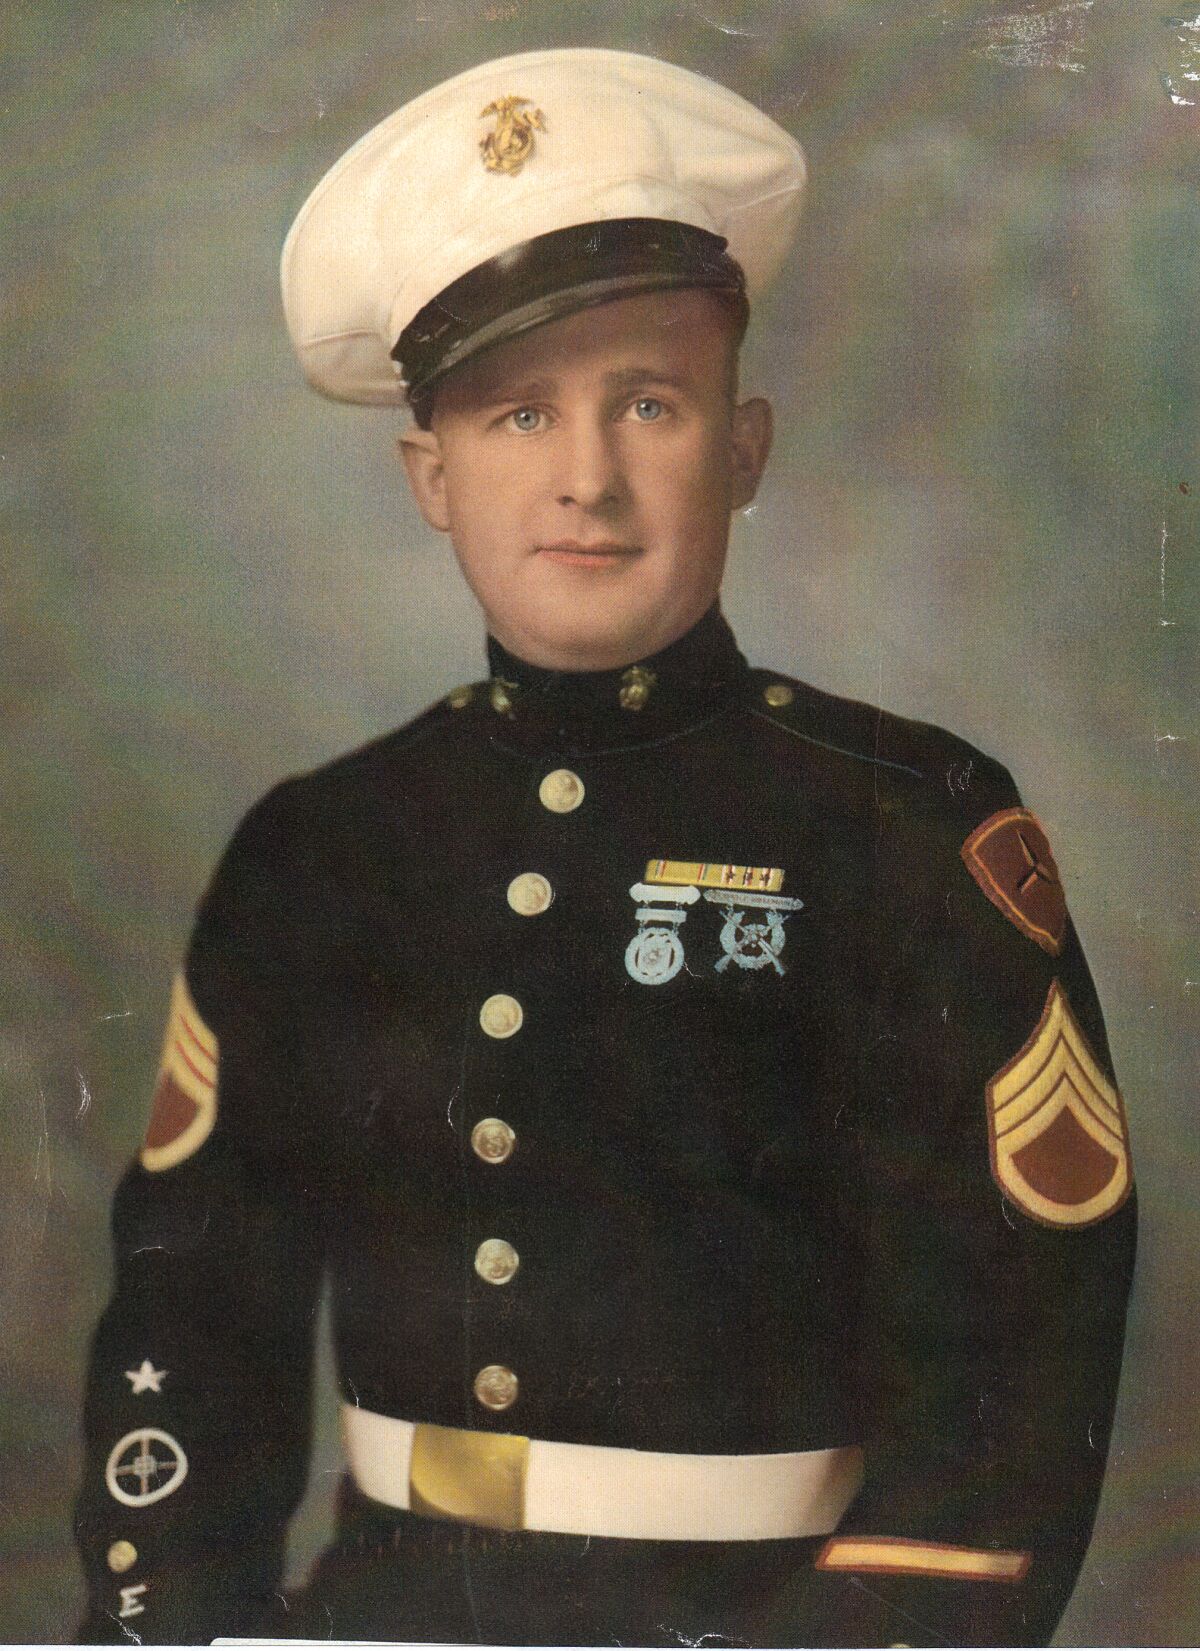 Retired Marine First Sgt. John Farritor pictured on July 9, 1945. The Vista resident, who served in World War II and the Korean War, turned 100 on July 9, 2019.